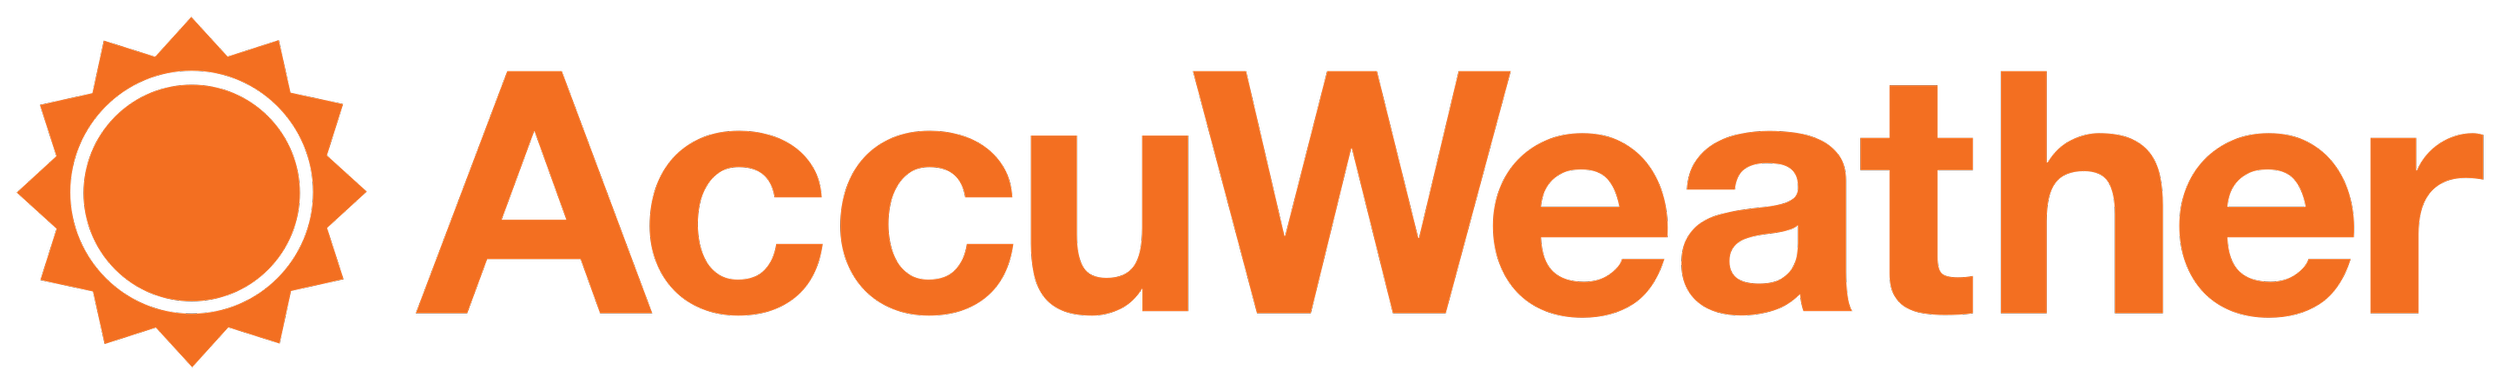 AccuWeather_Logo.svg.png